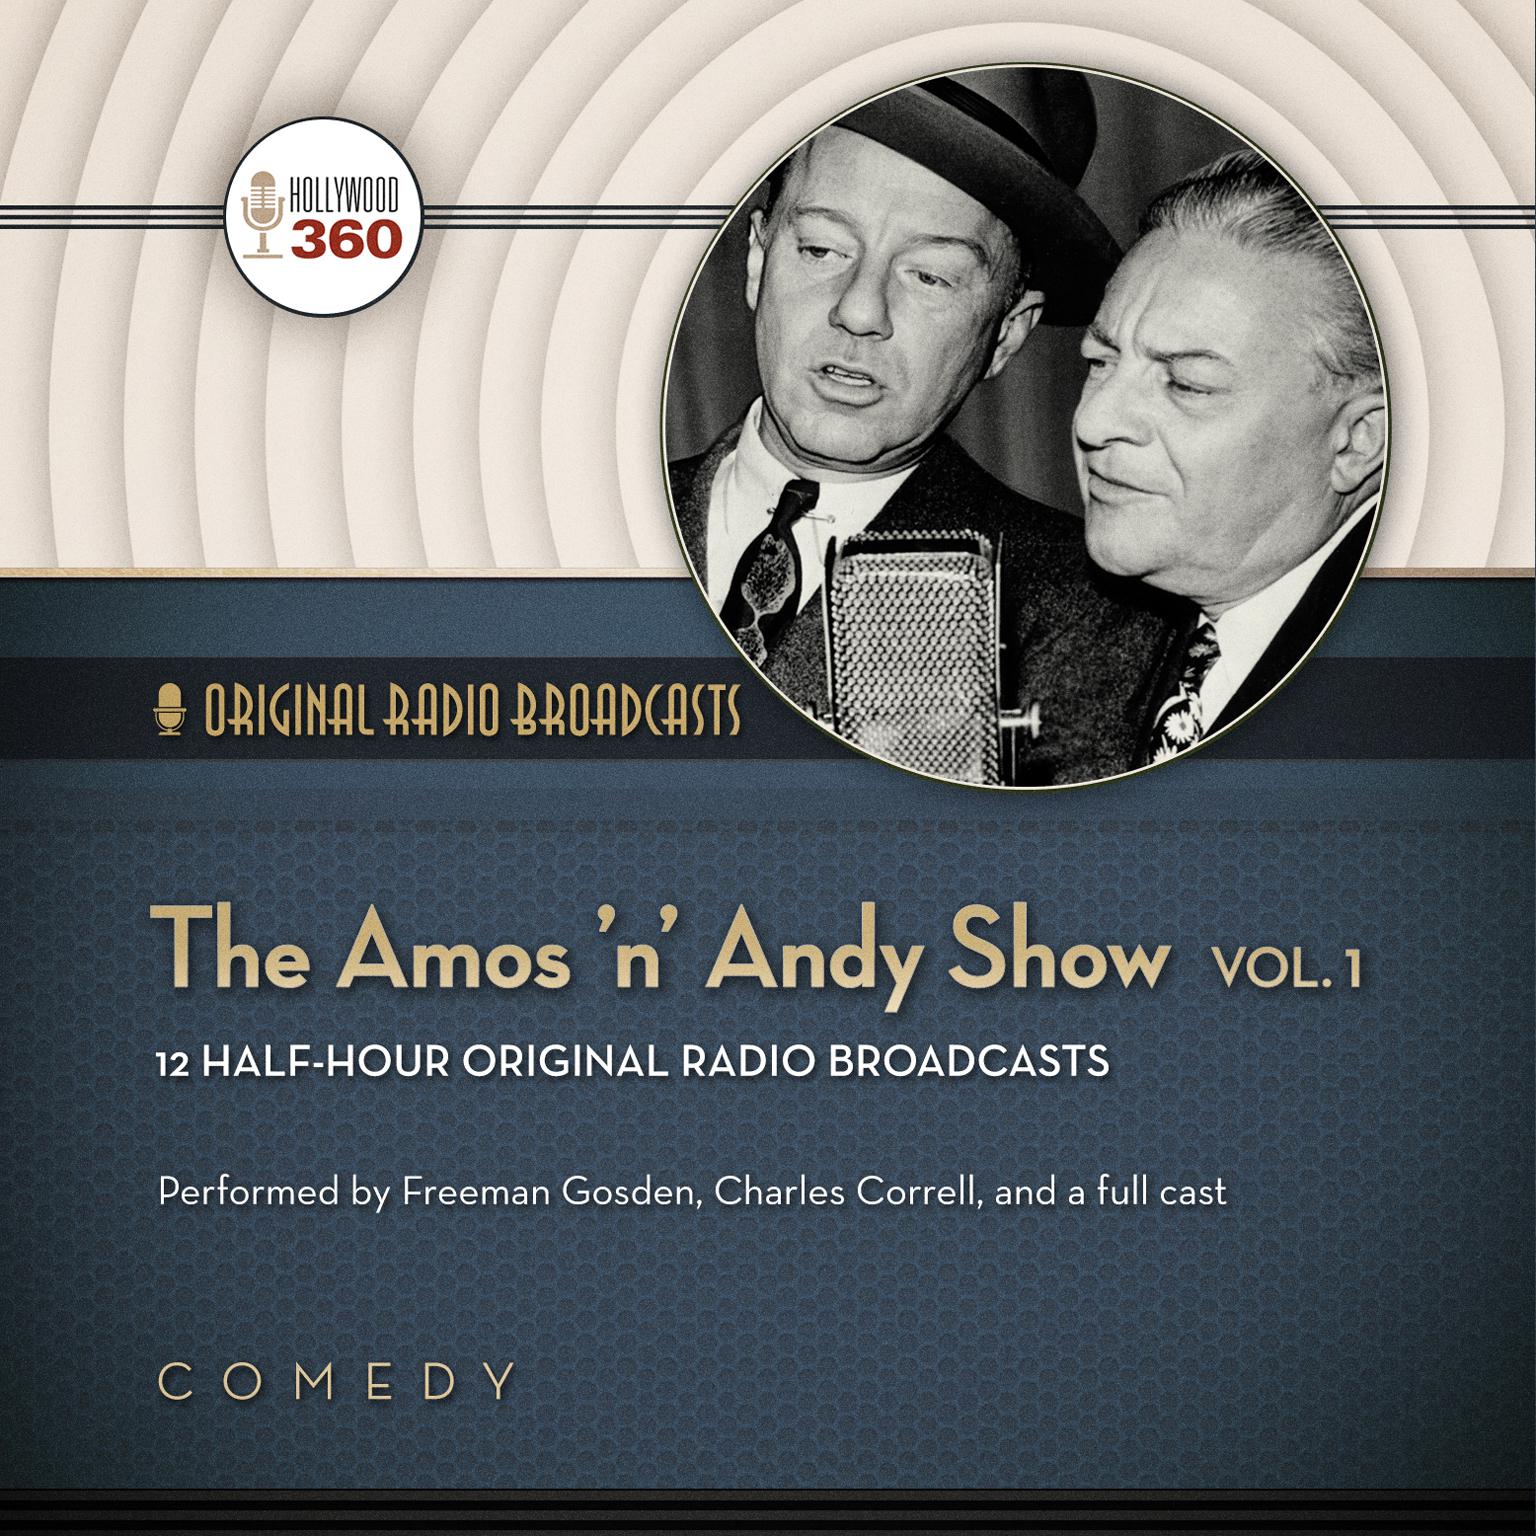 The Amos ’n’ Andy Show, Vol. 1 Audiobook, by Hollywood 360